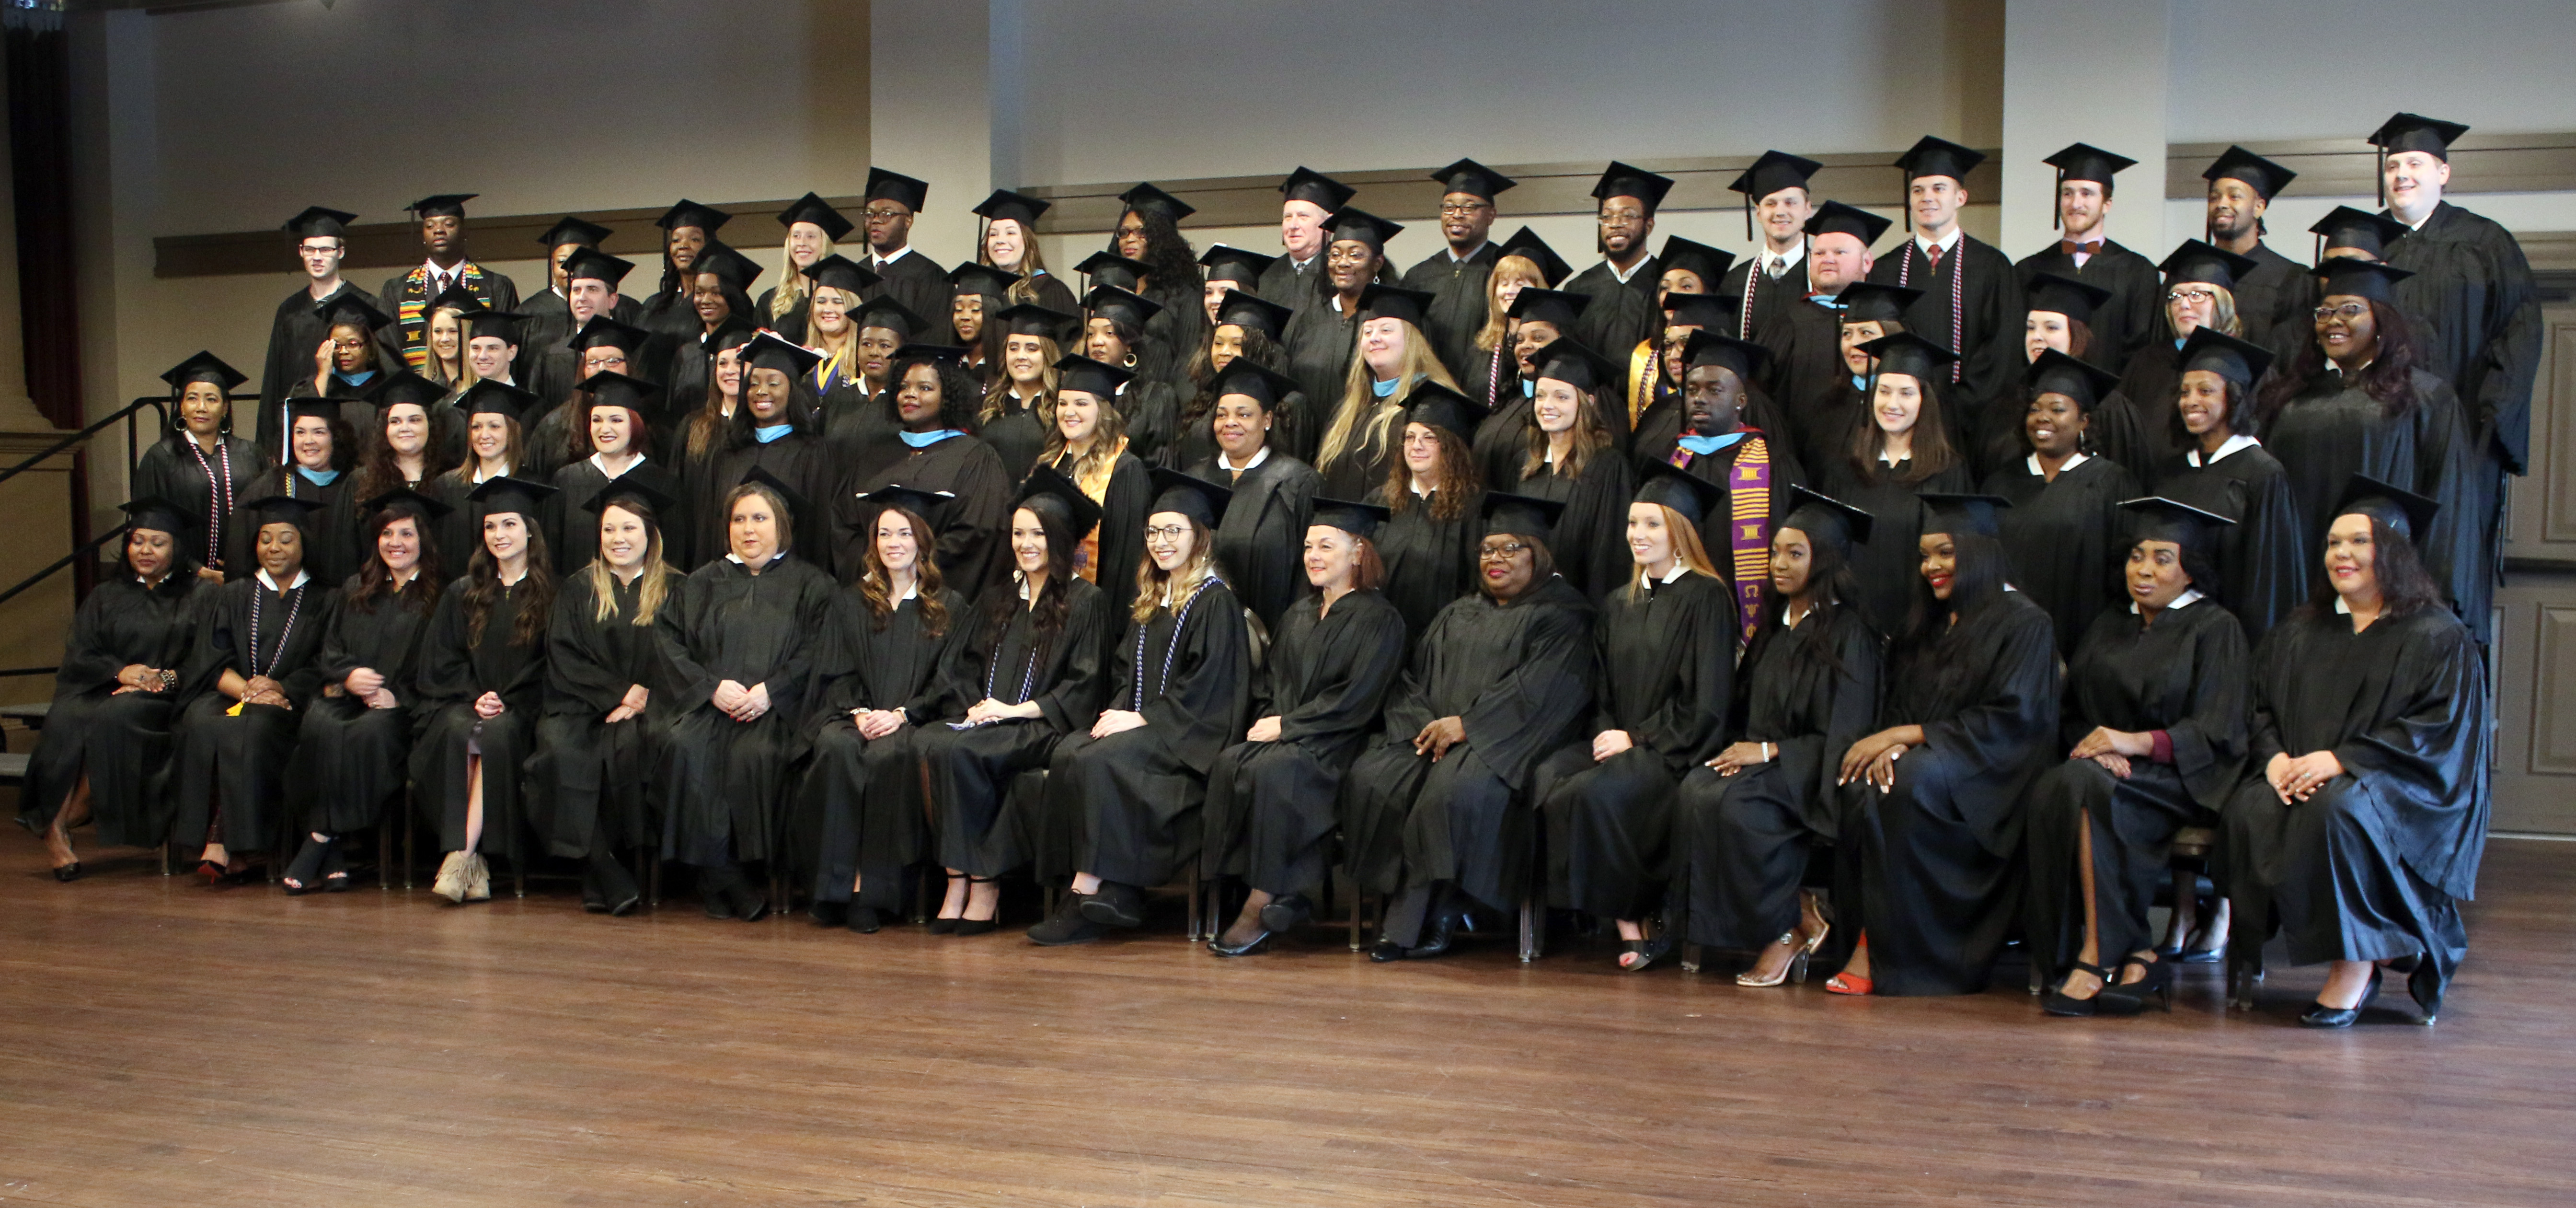 2018 Fall degree candidates pose for a group photo before commencement exercises Thursday, Dec 13 at the MSU Riley Center